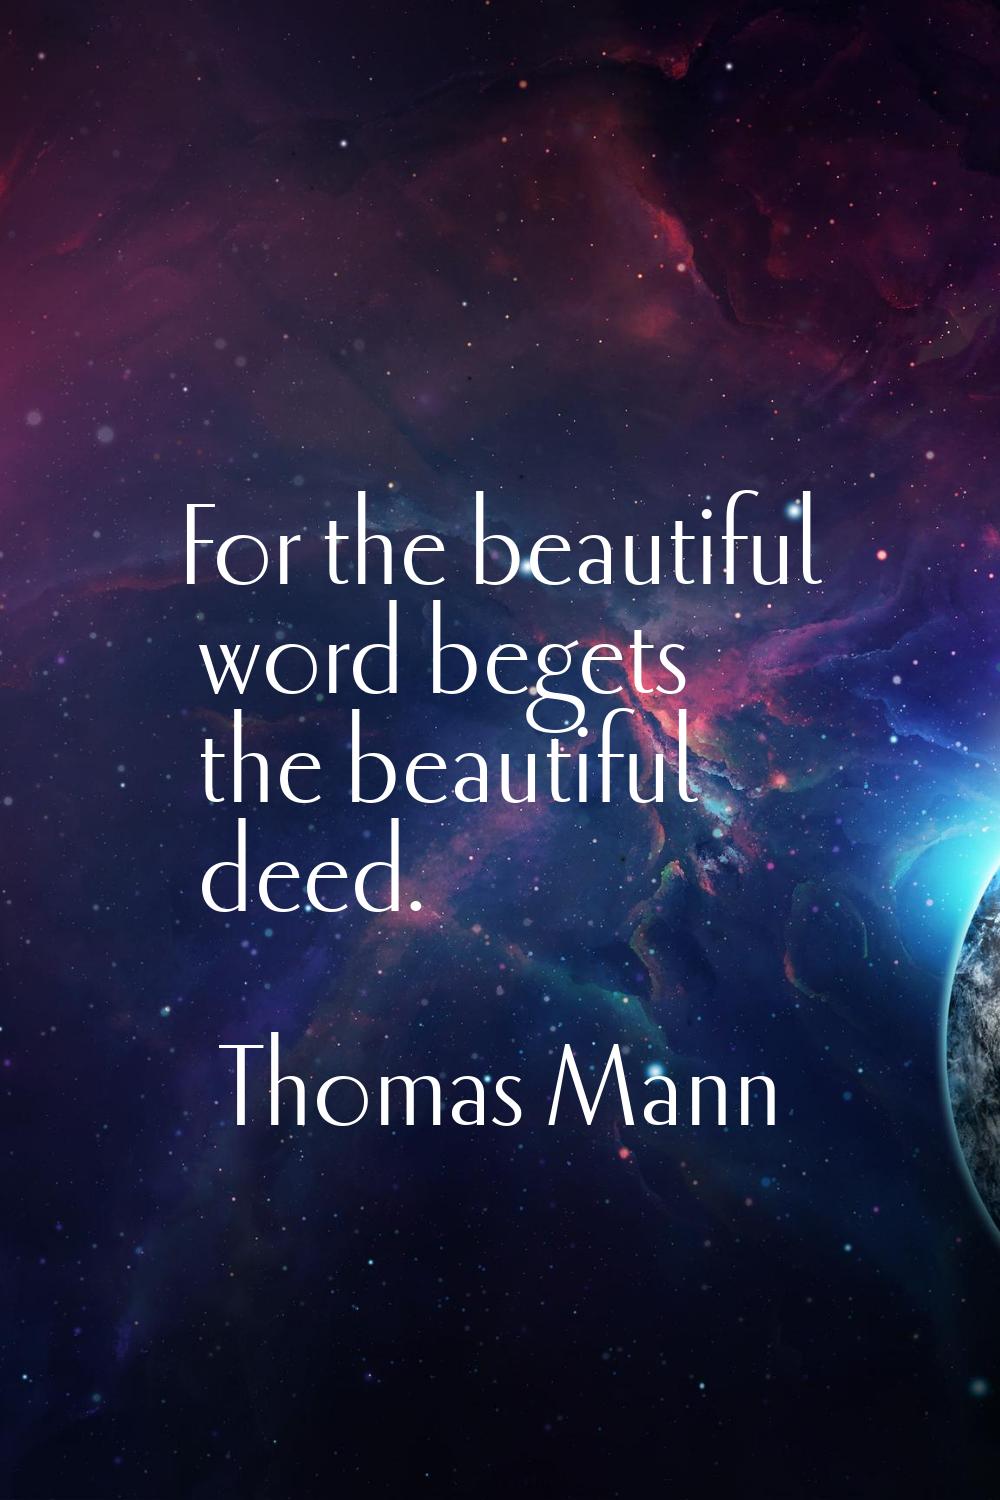 For the beautiful word begets the beautiful deed.